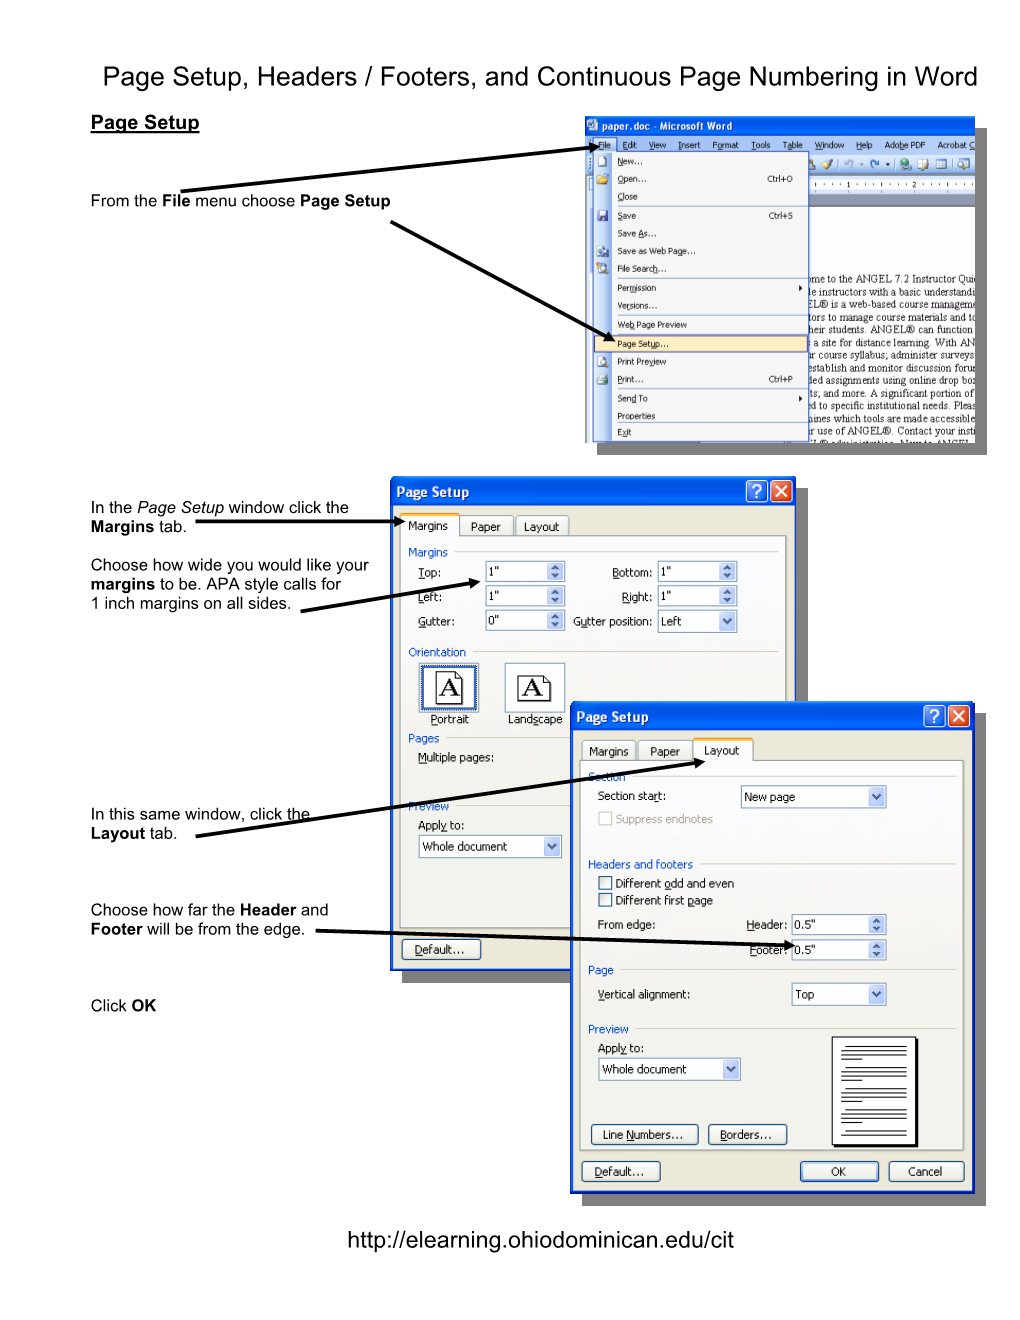 Page Setup, Headers / Footers, and Continuous Page Numbering in Word